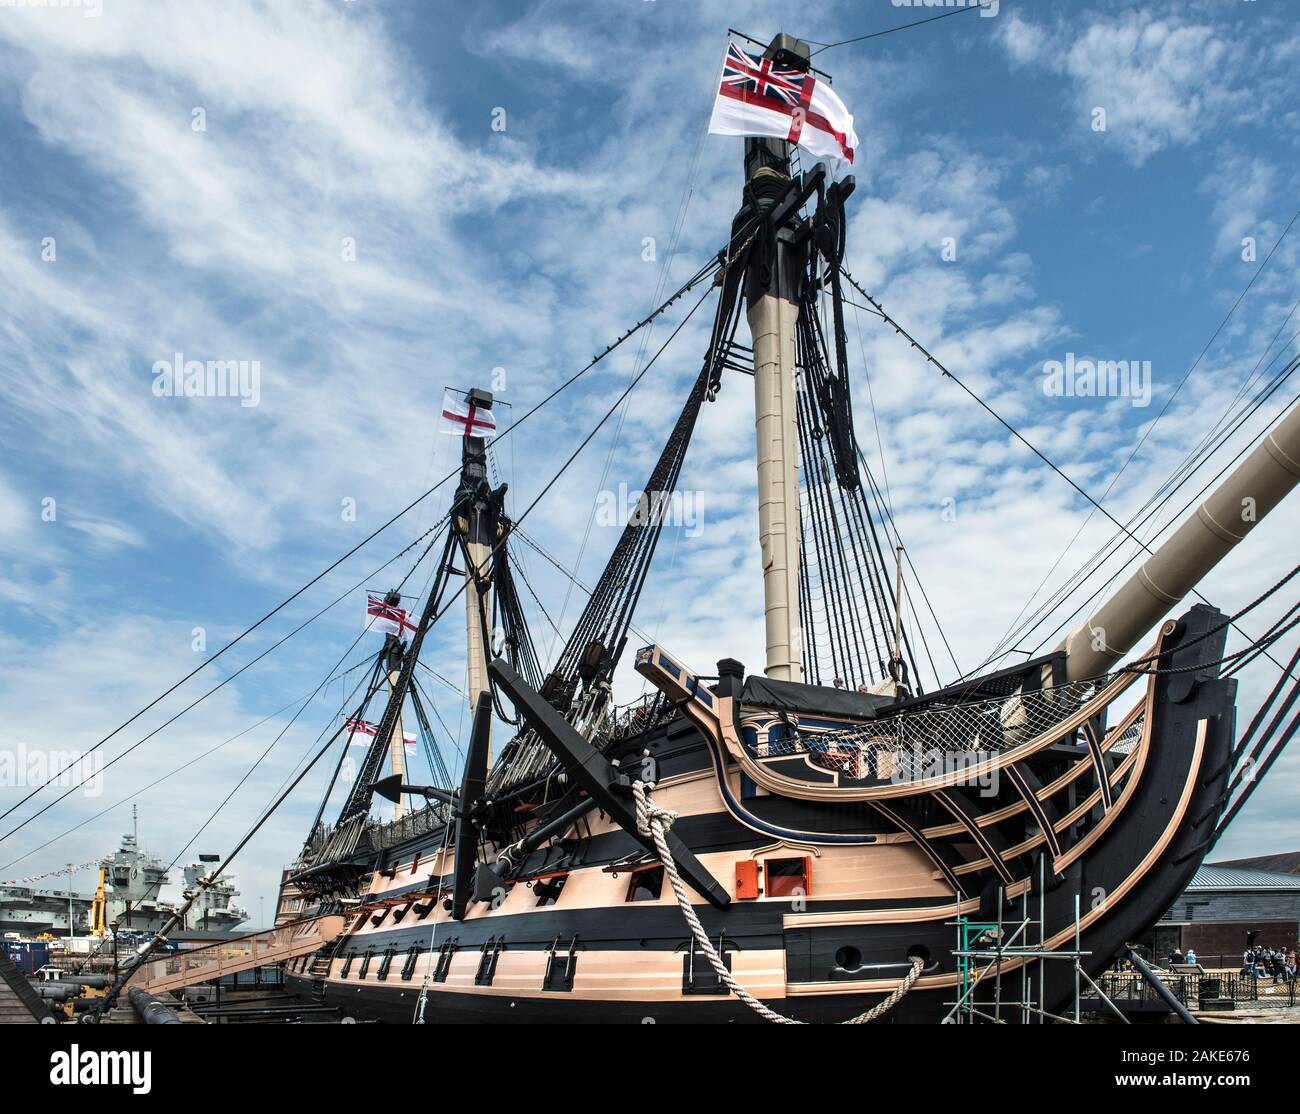 HMS Victory, historic flagship. Nelson. Battle of Trafalgar, flying the White Ensign. Portsmouth Dockyard. Starboard. Queen Elizabeth aircraft carrier. Stock Photo